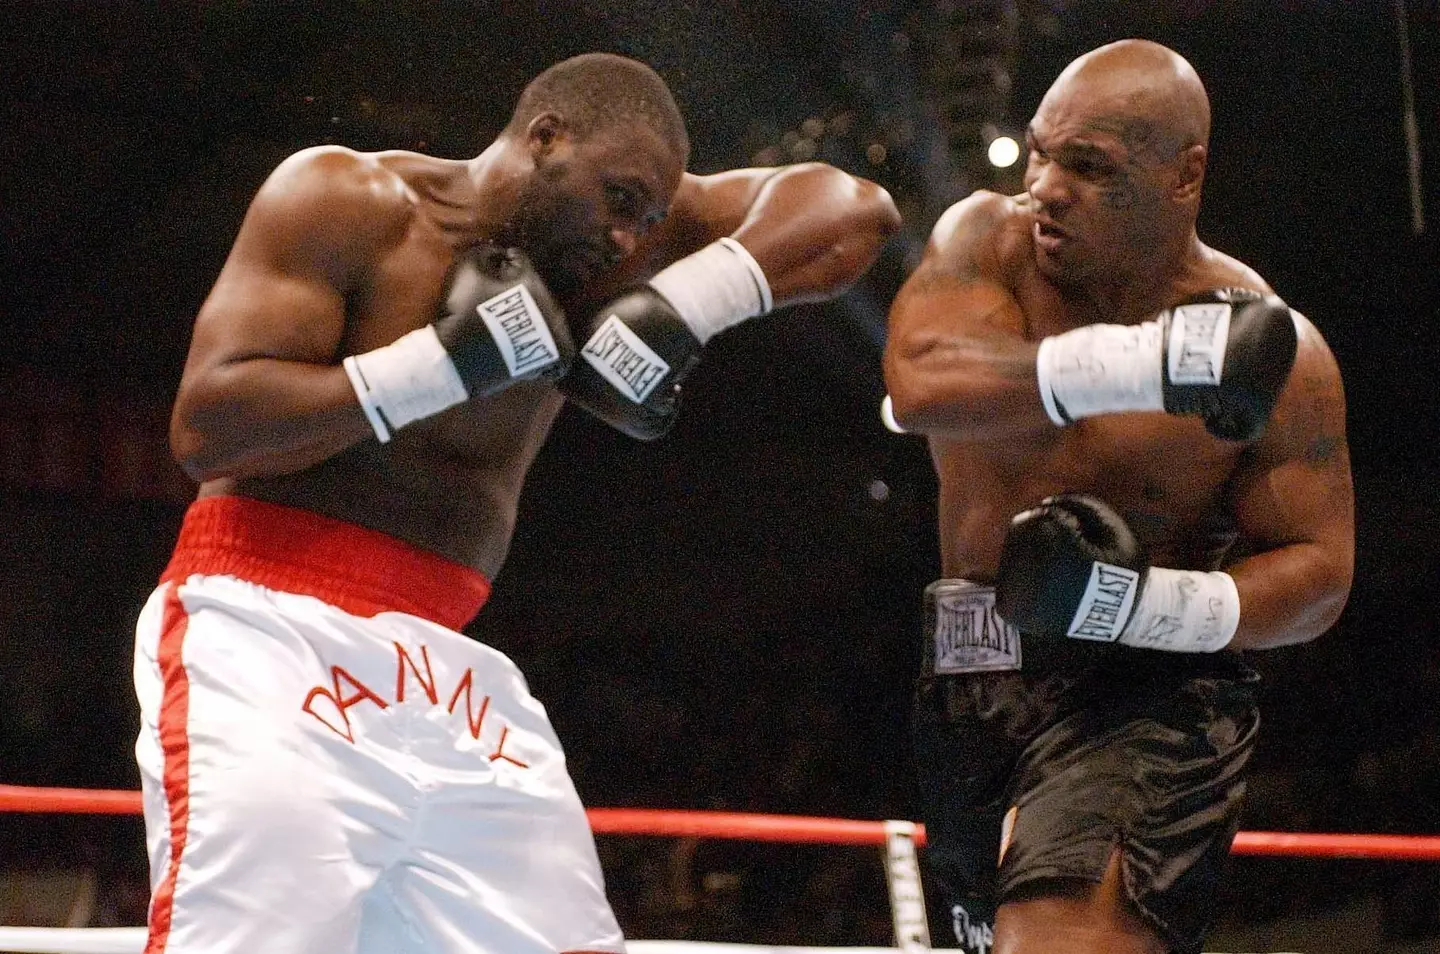 Mike Tyson (right) in action against England's Danny Williams during their heavyweight contest at the Freedom Hall in Louisville, Kentucky, USA. Tyson was knocked out by Williams in the fourth round.